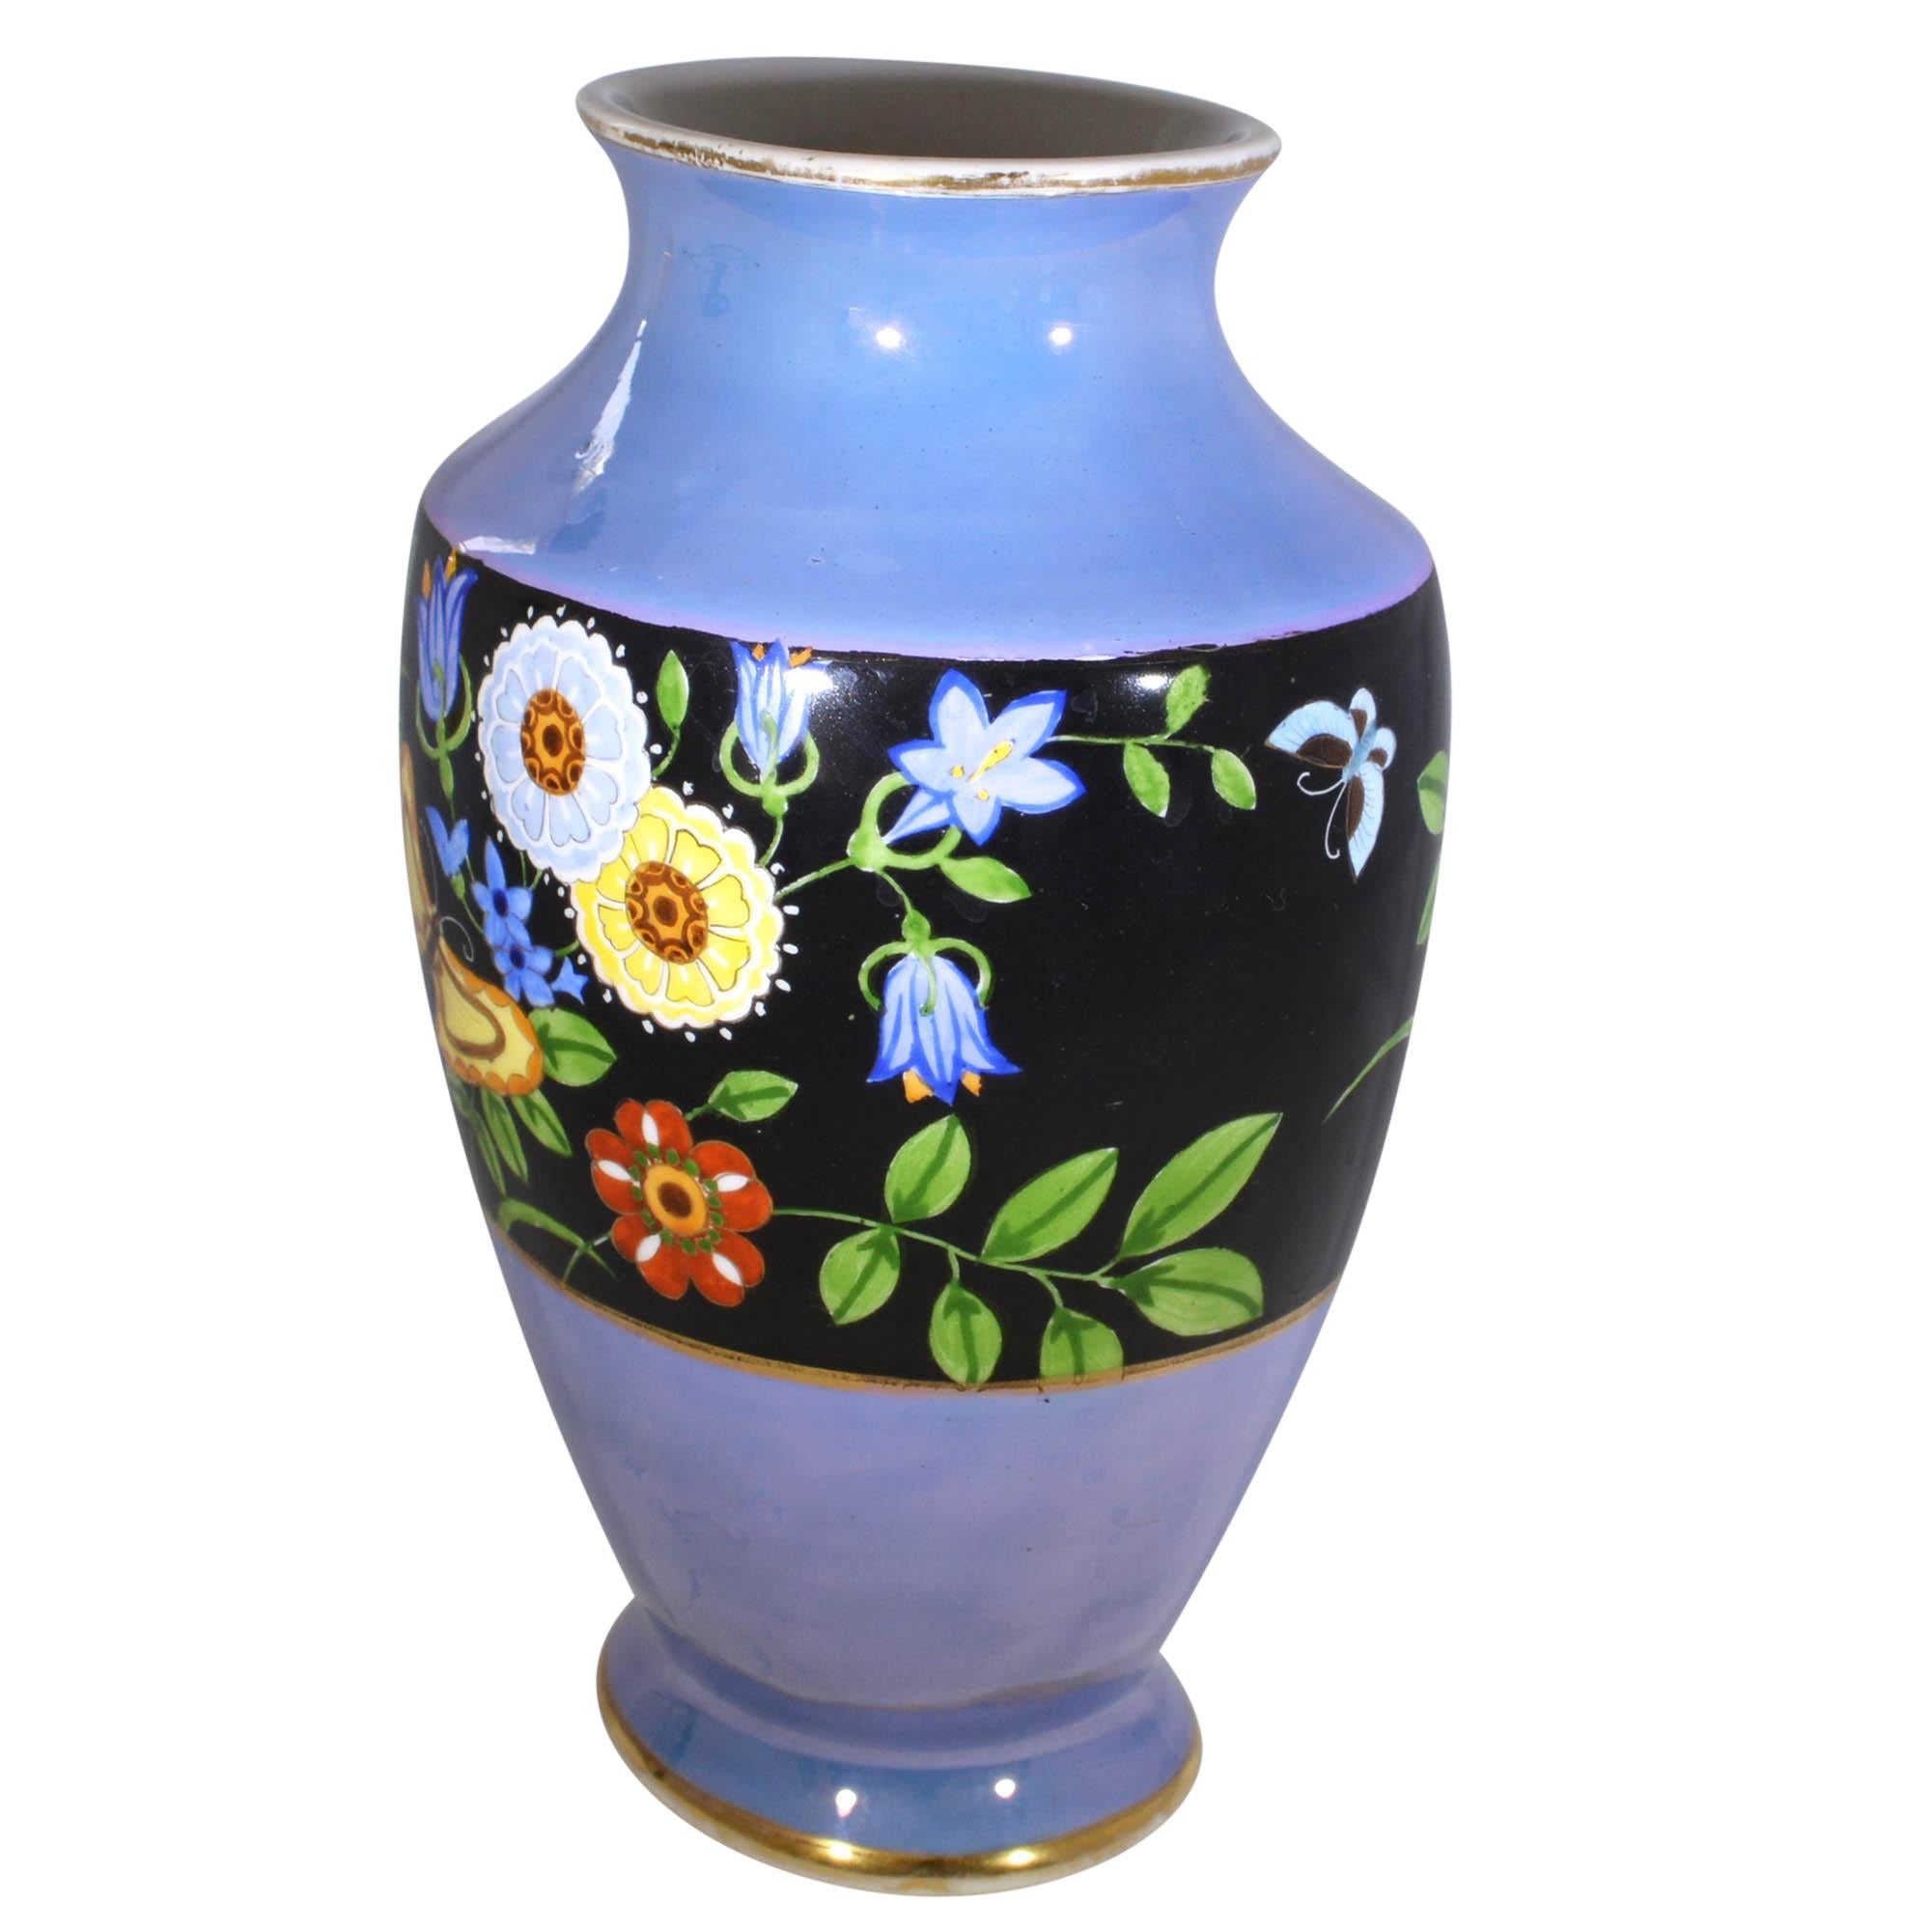 Blue vase had a large black band around the body which is adorned with a whimsical hand painted design of flowers and butterflies. The design has vibrant pinks, reds and many other colors. The design continues around the vase. The gold accents makes